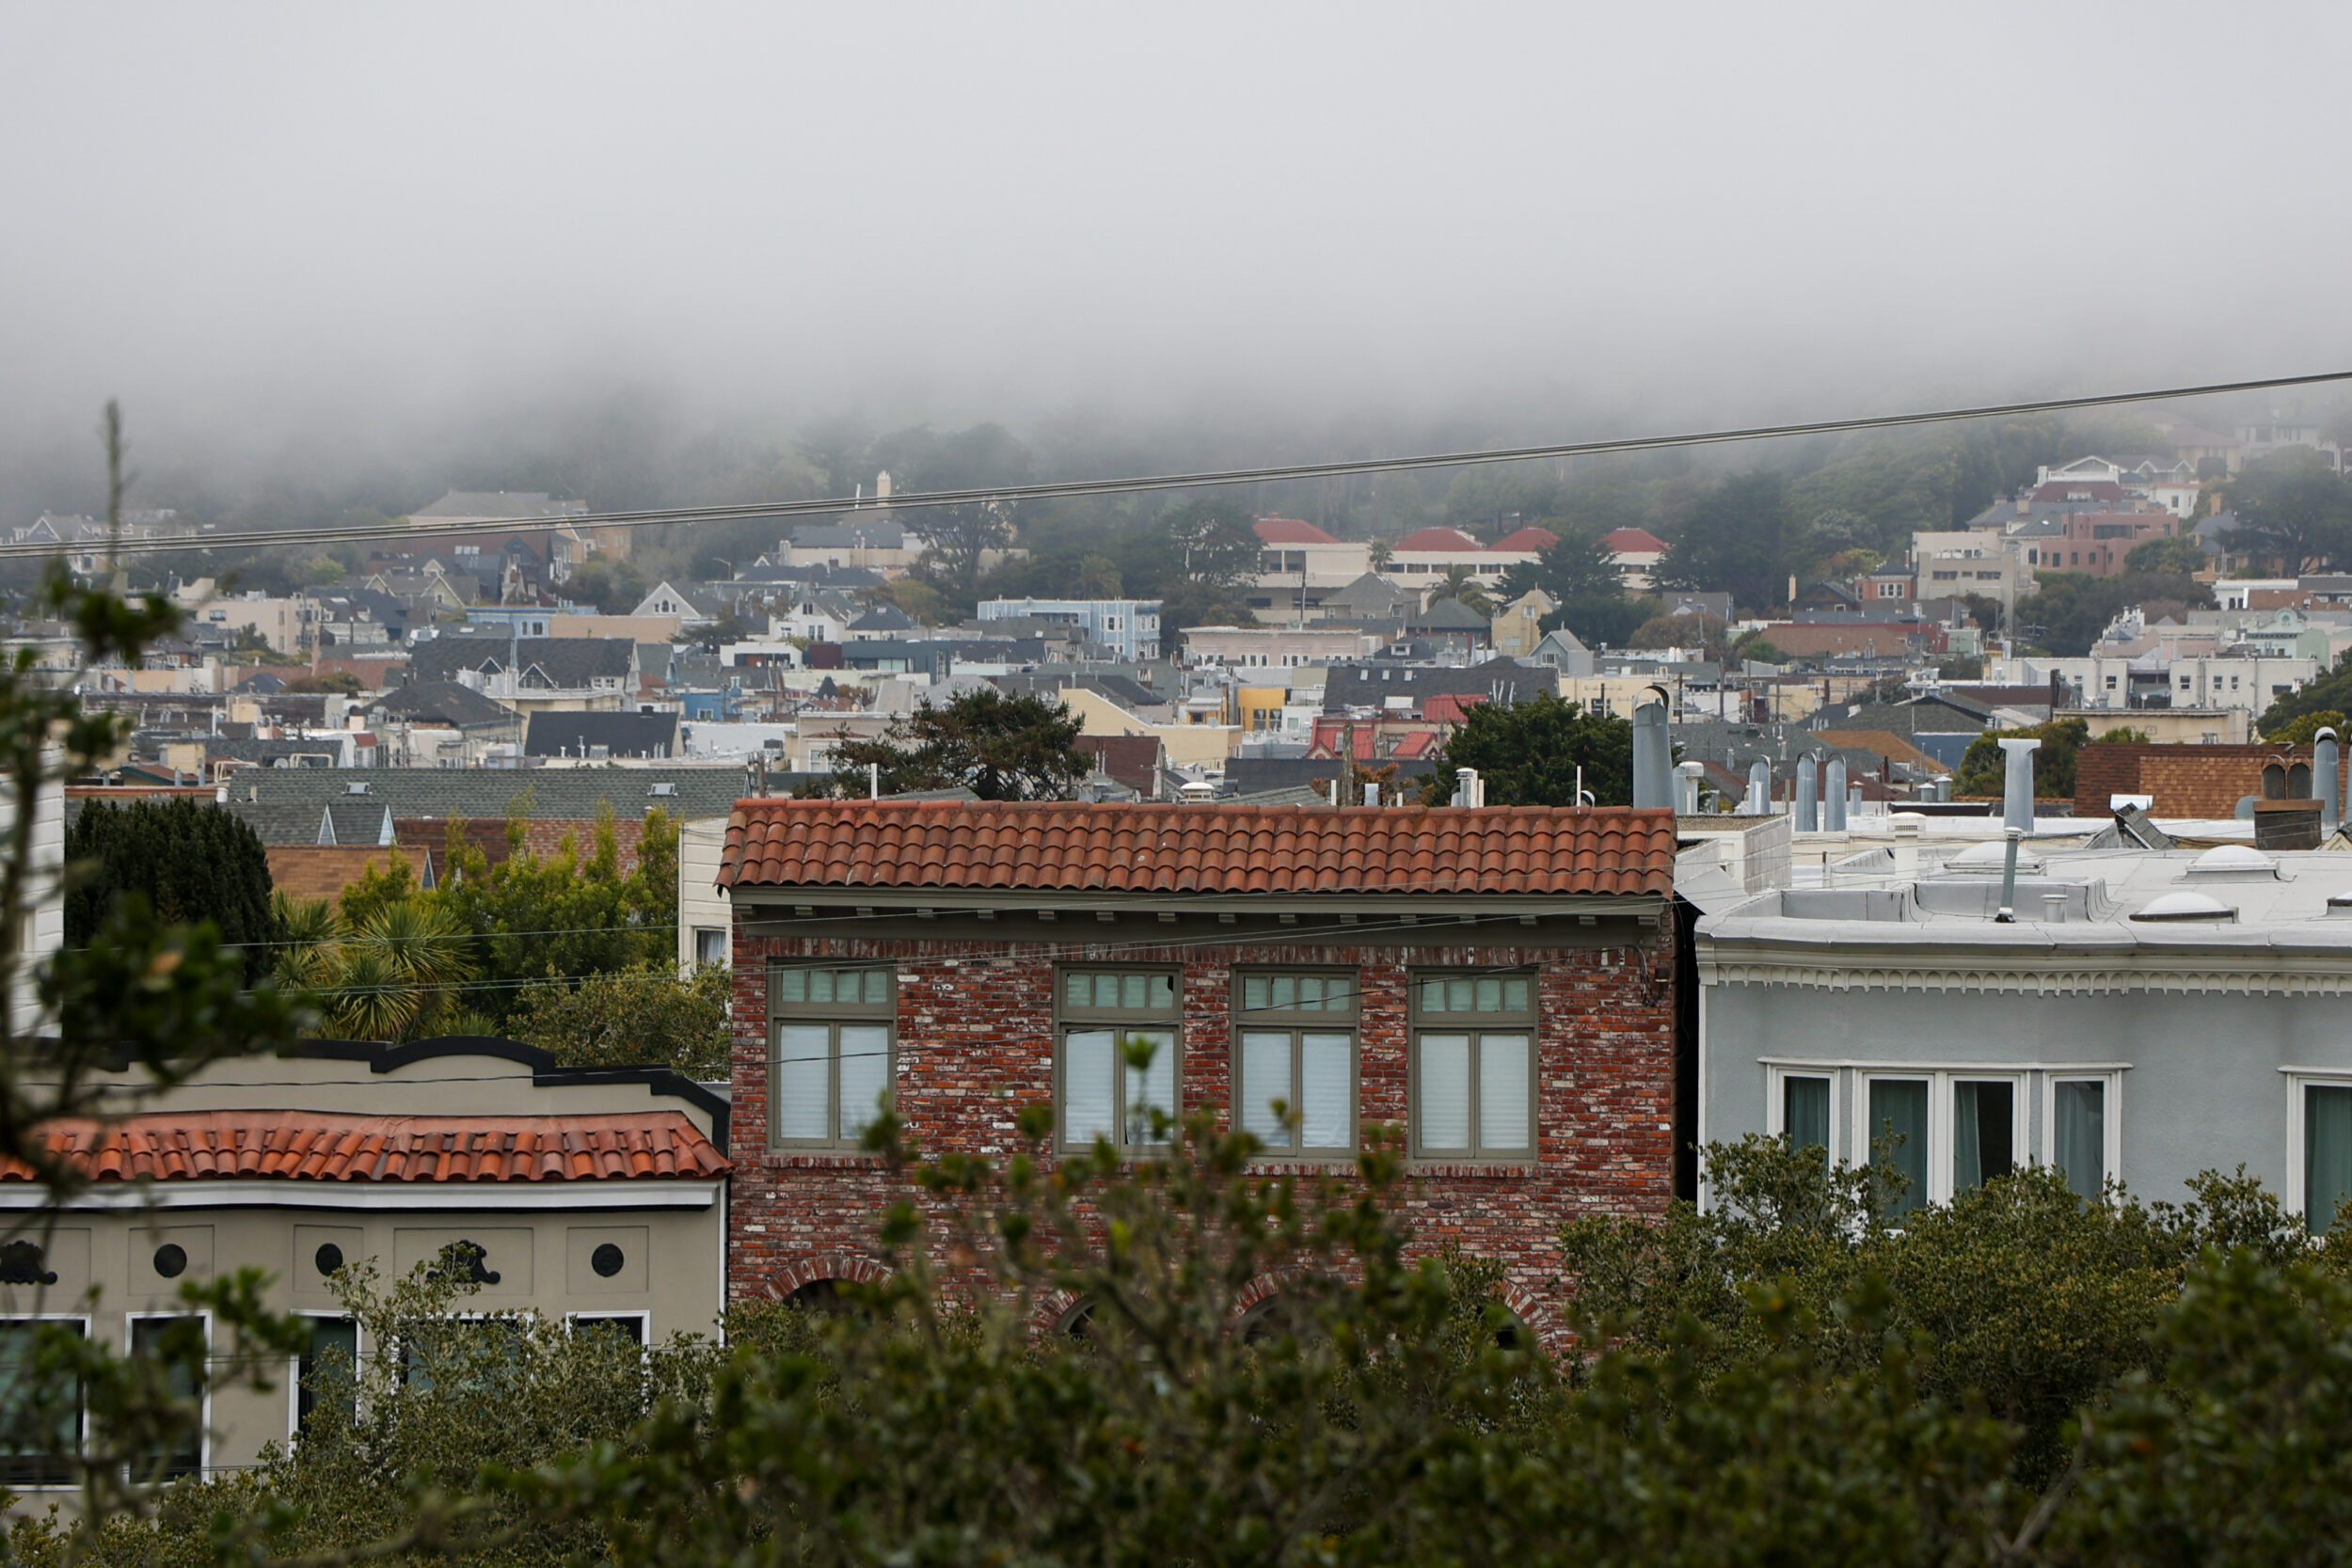 San Francisco's Richmond District, seen draped in fog in March 2022, is one of TimeOut magazine's coolest world neighborhoods.